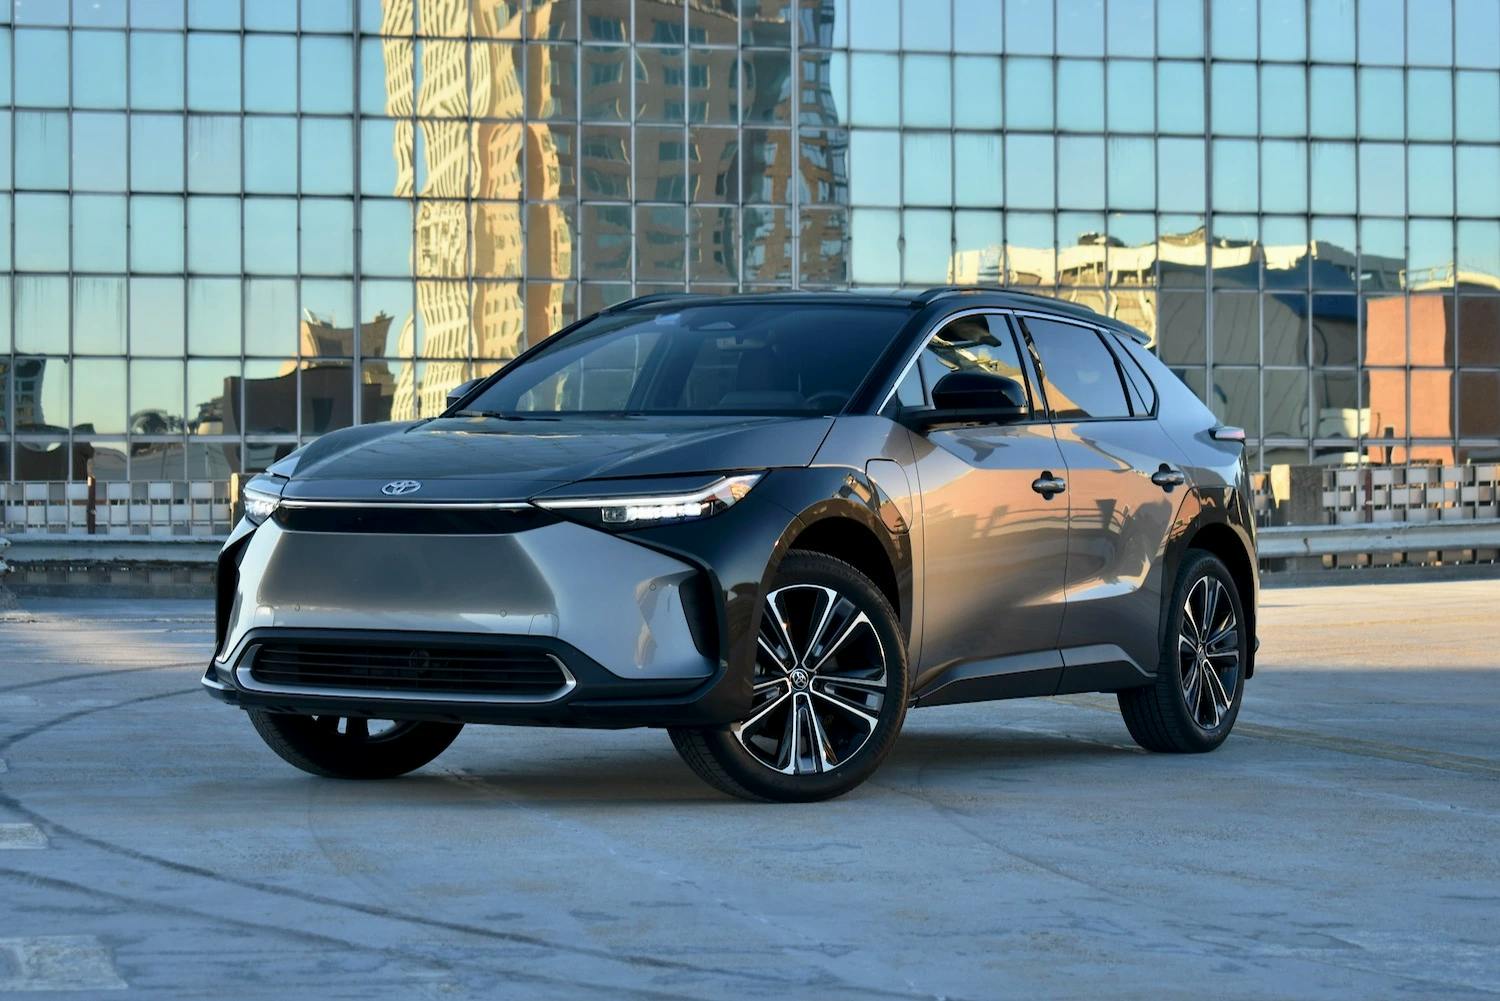 Introducing the Toyota bZ4X A Futuristic AllElectric Crossover SUV